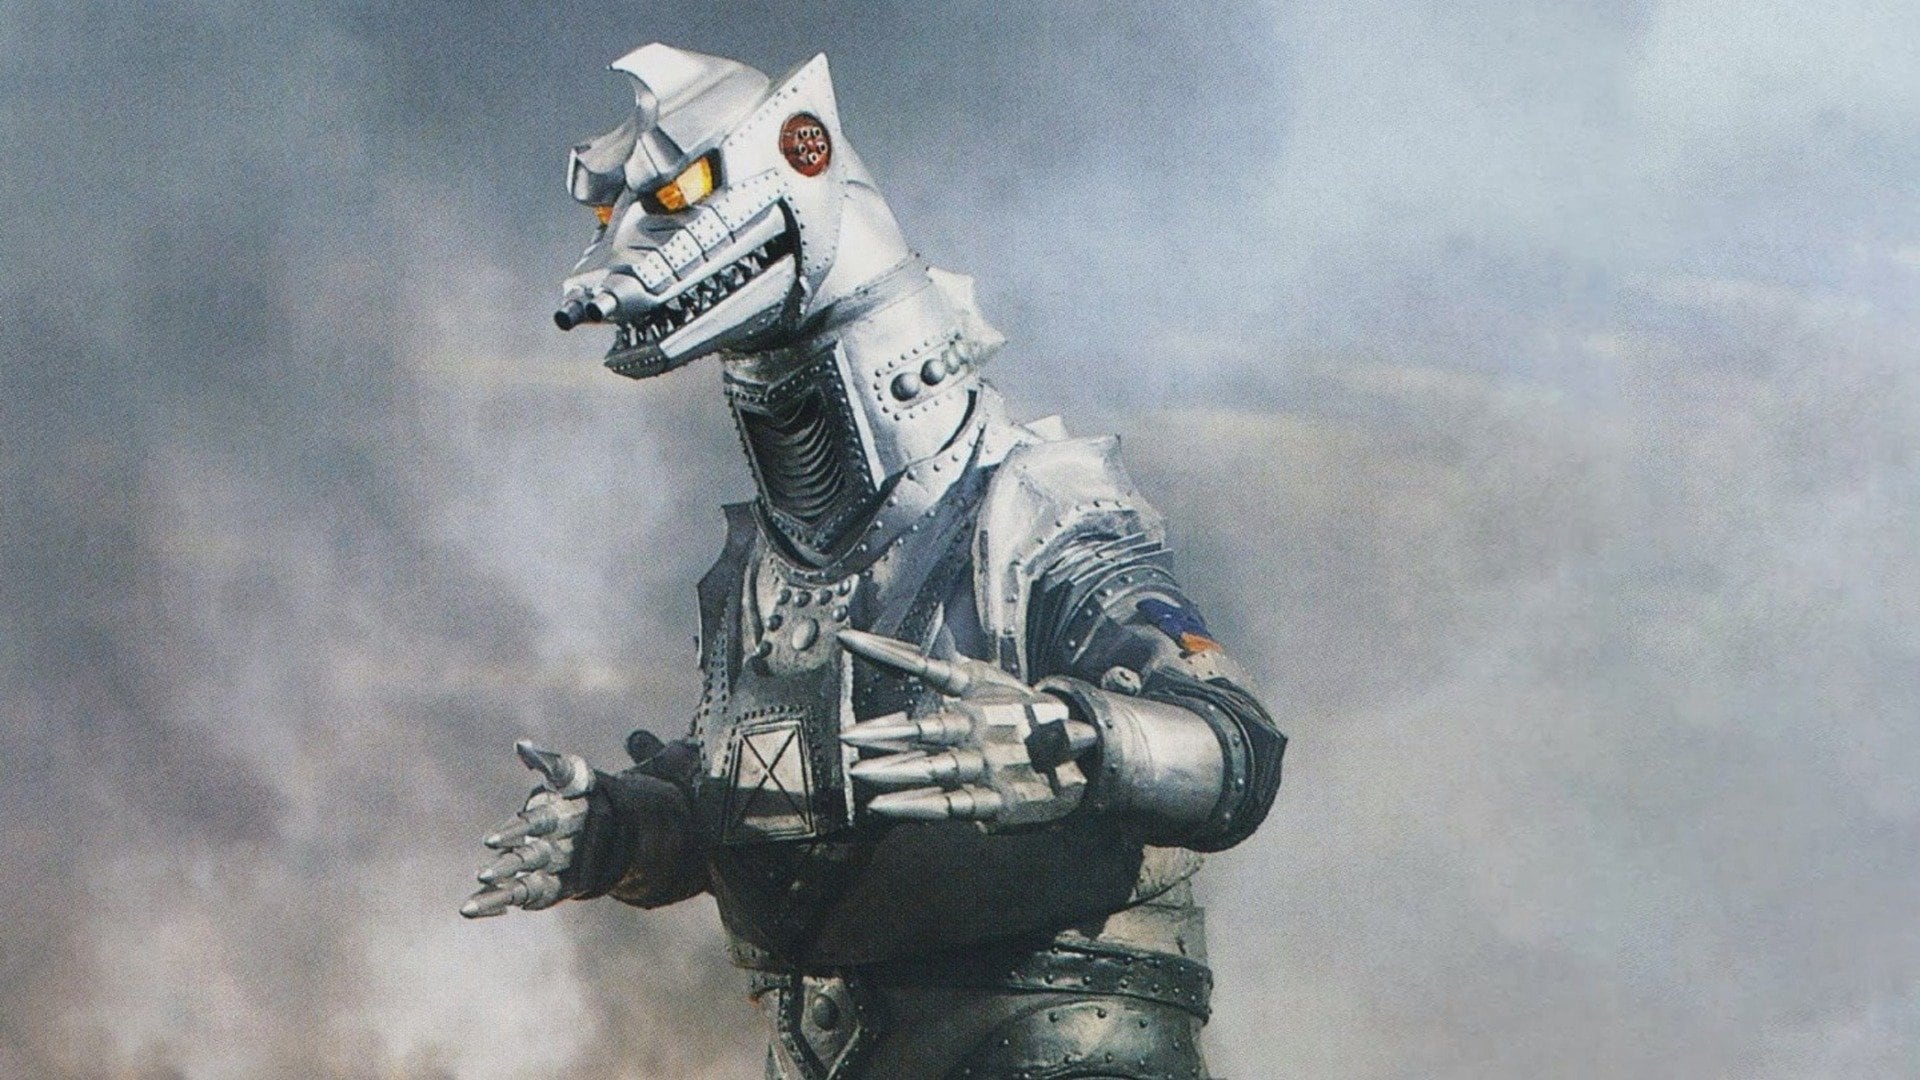 This is a film still from TERROR OF MECHAGODZILLA featuring a giant robot dinosaur looking menacing.